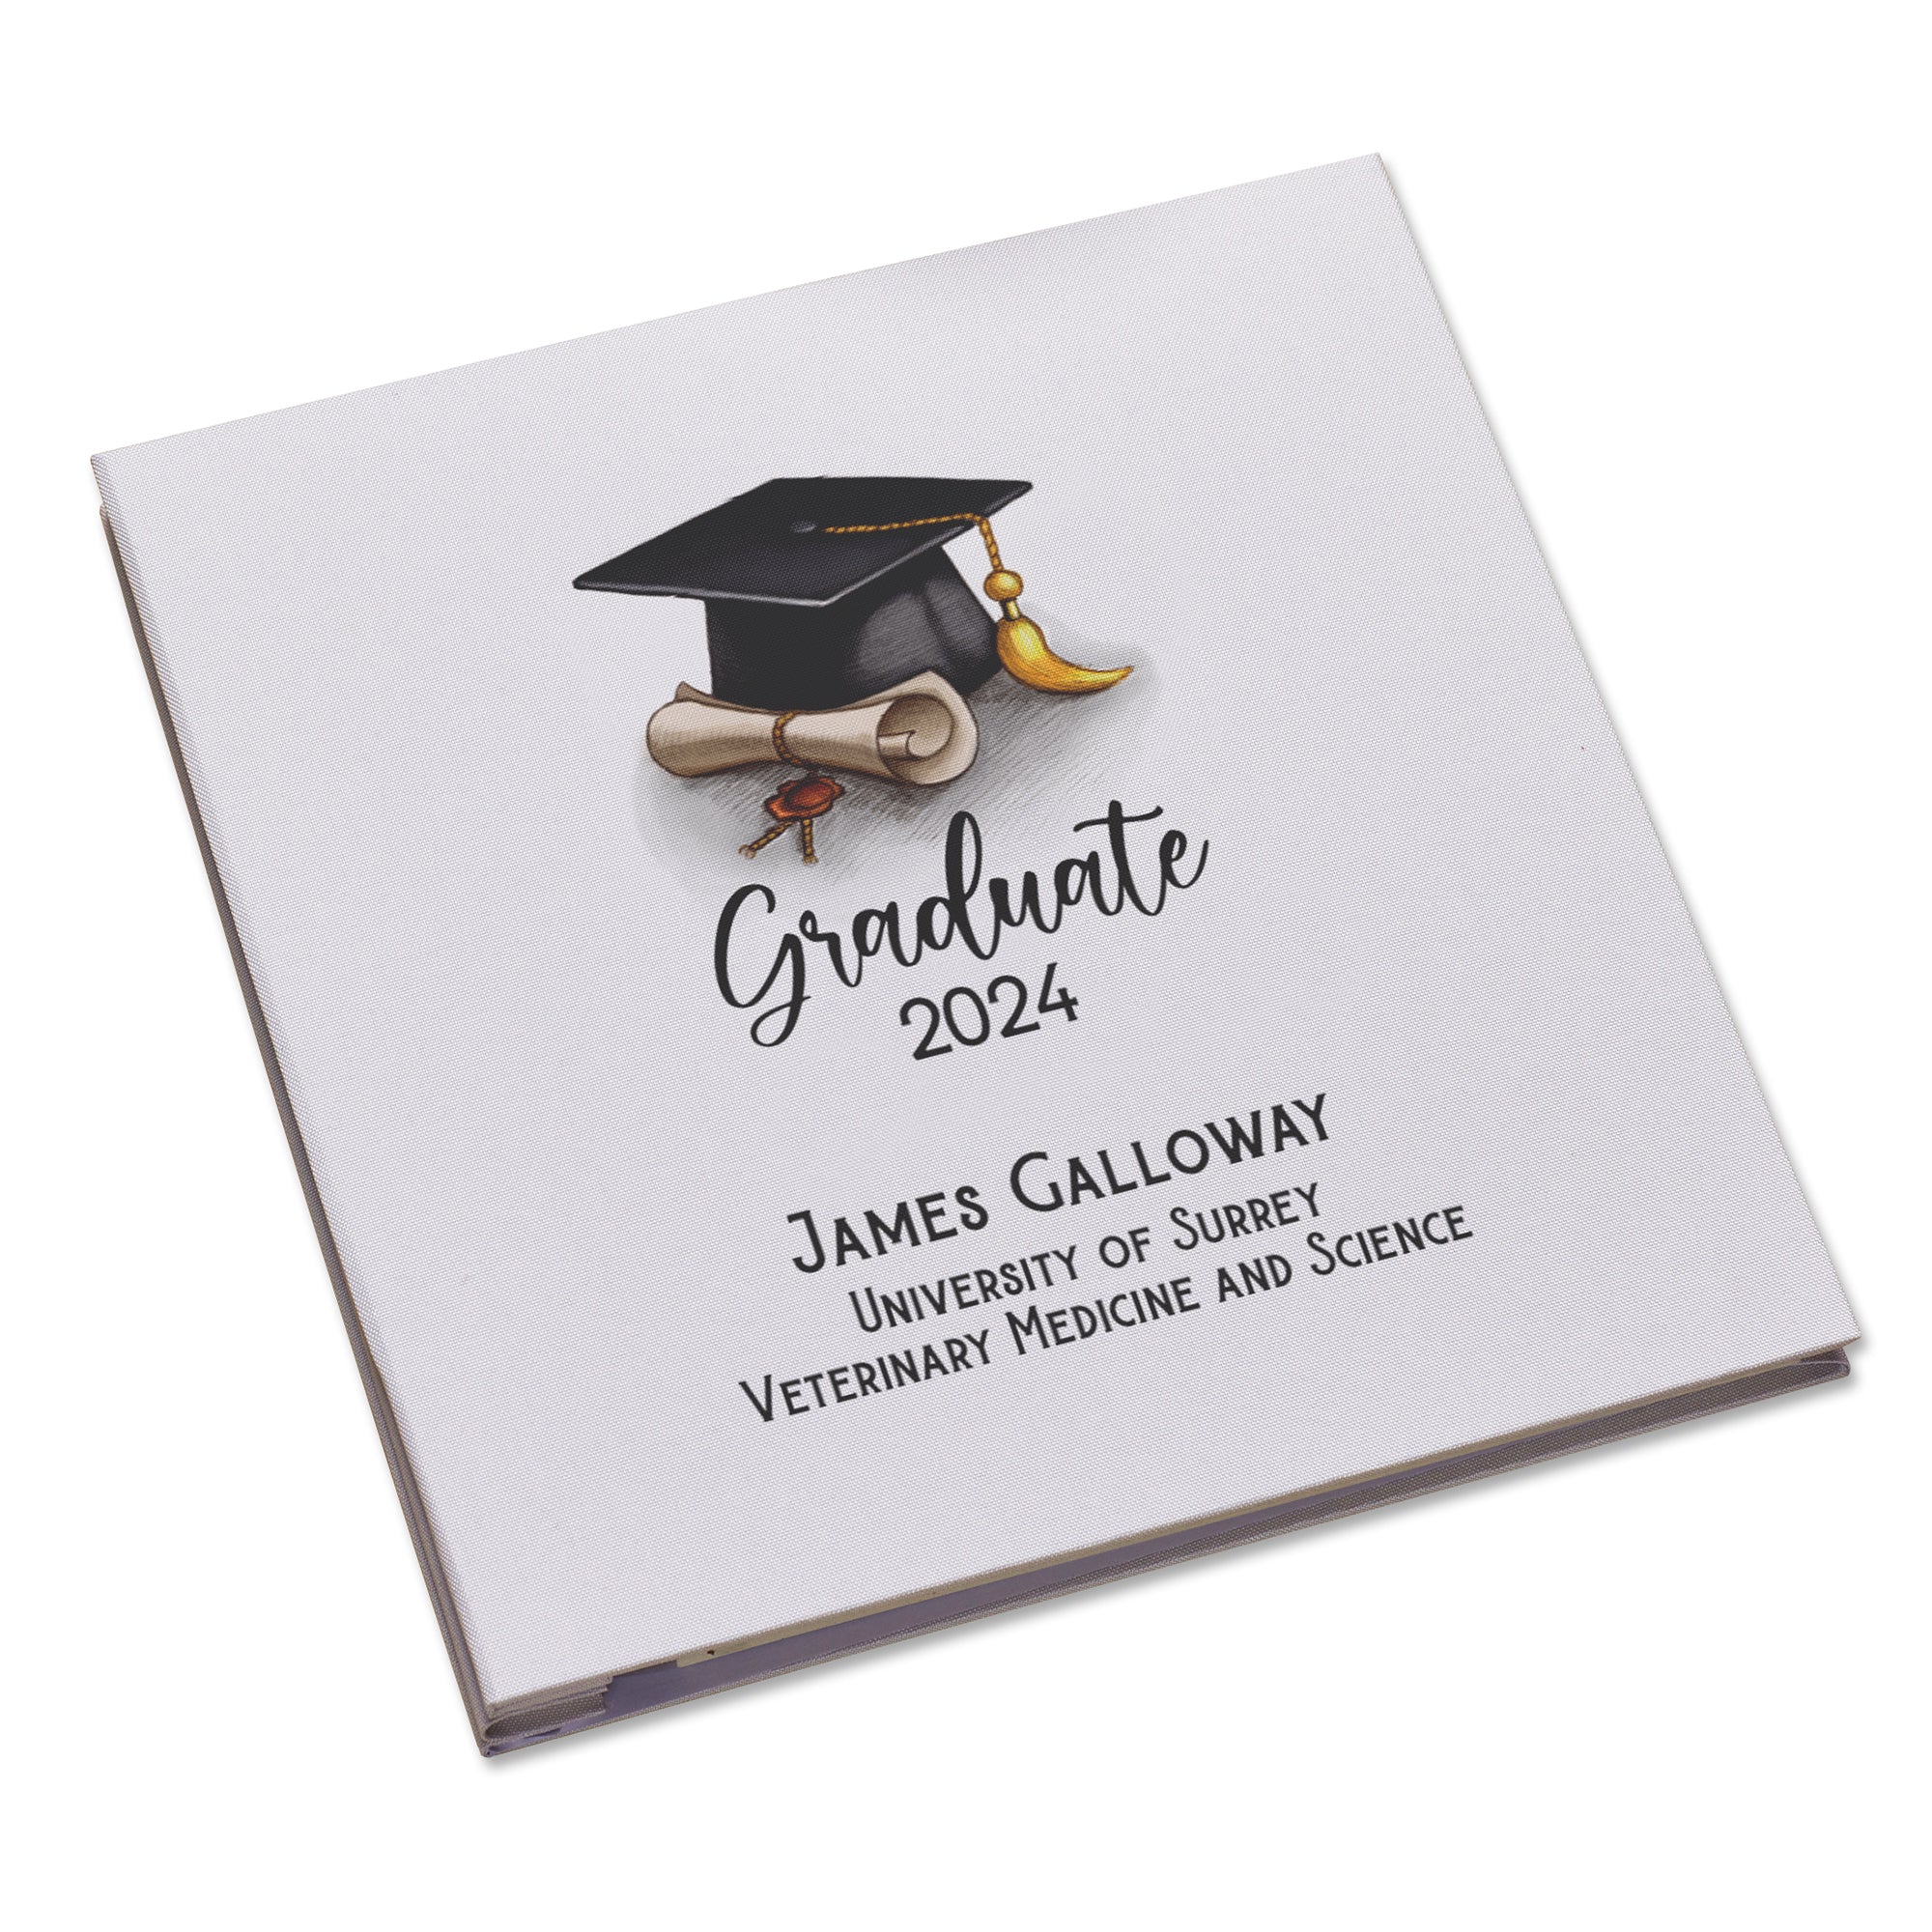 Personalised Graduation Photo Album Gift With Linen Cover and Hat Design